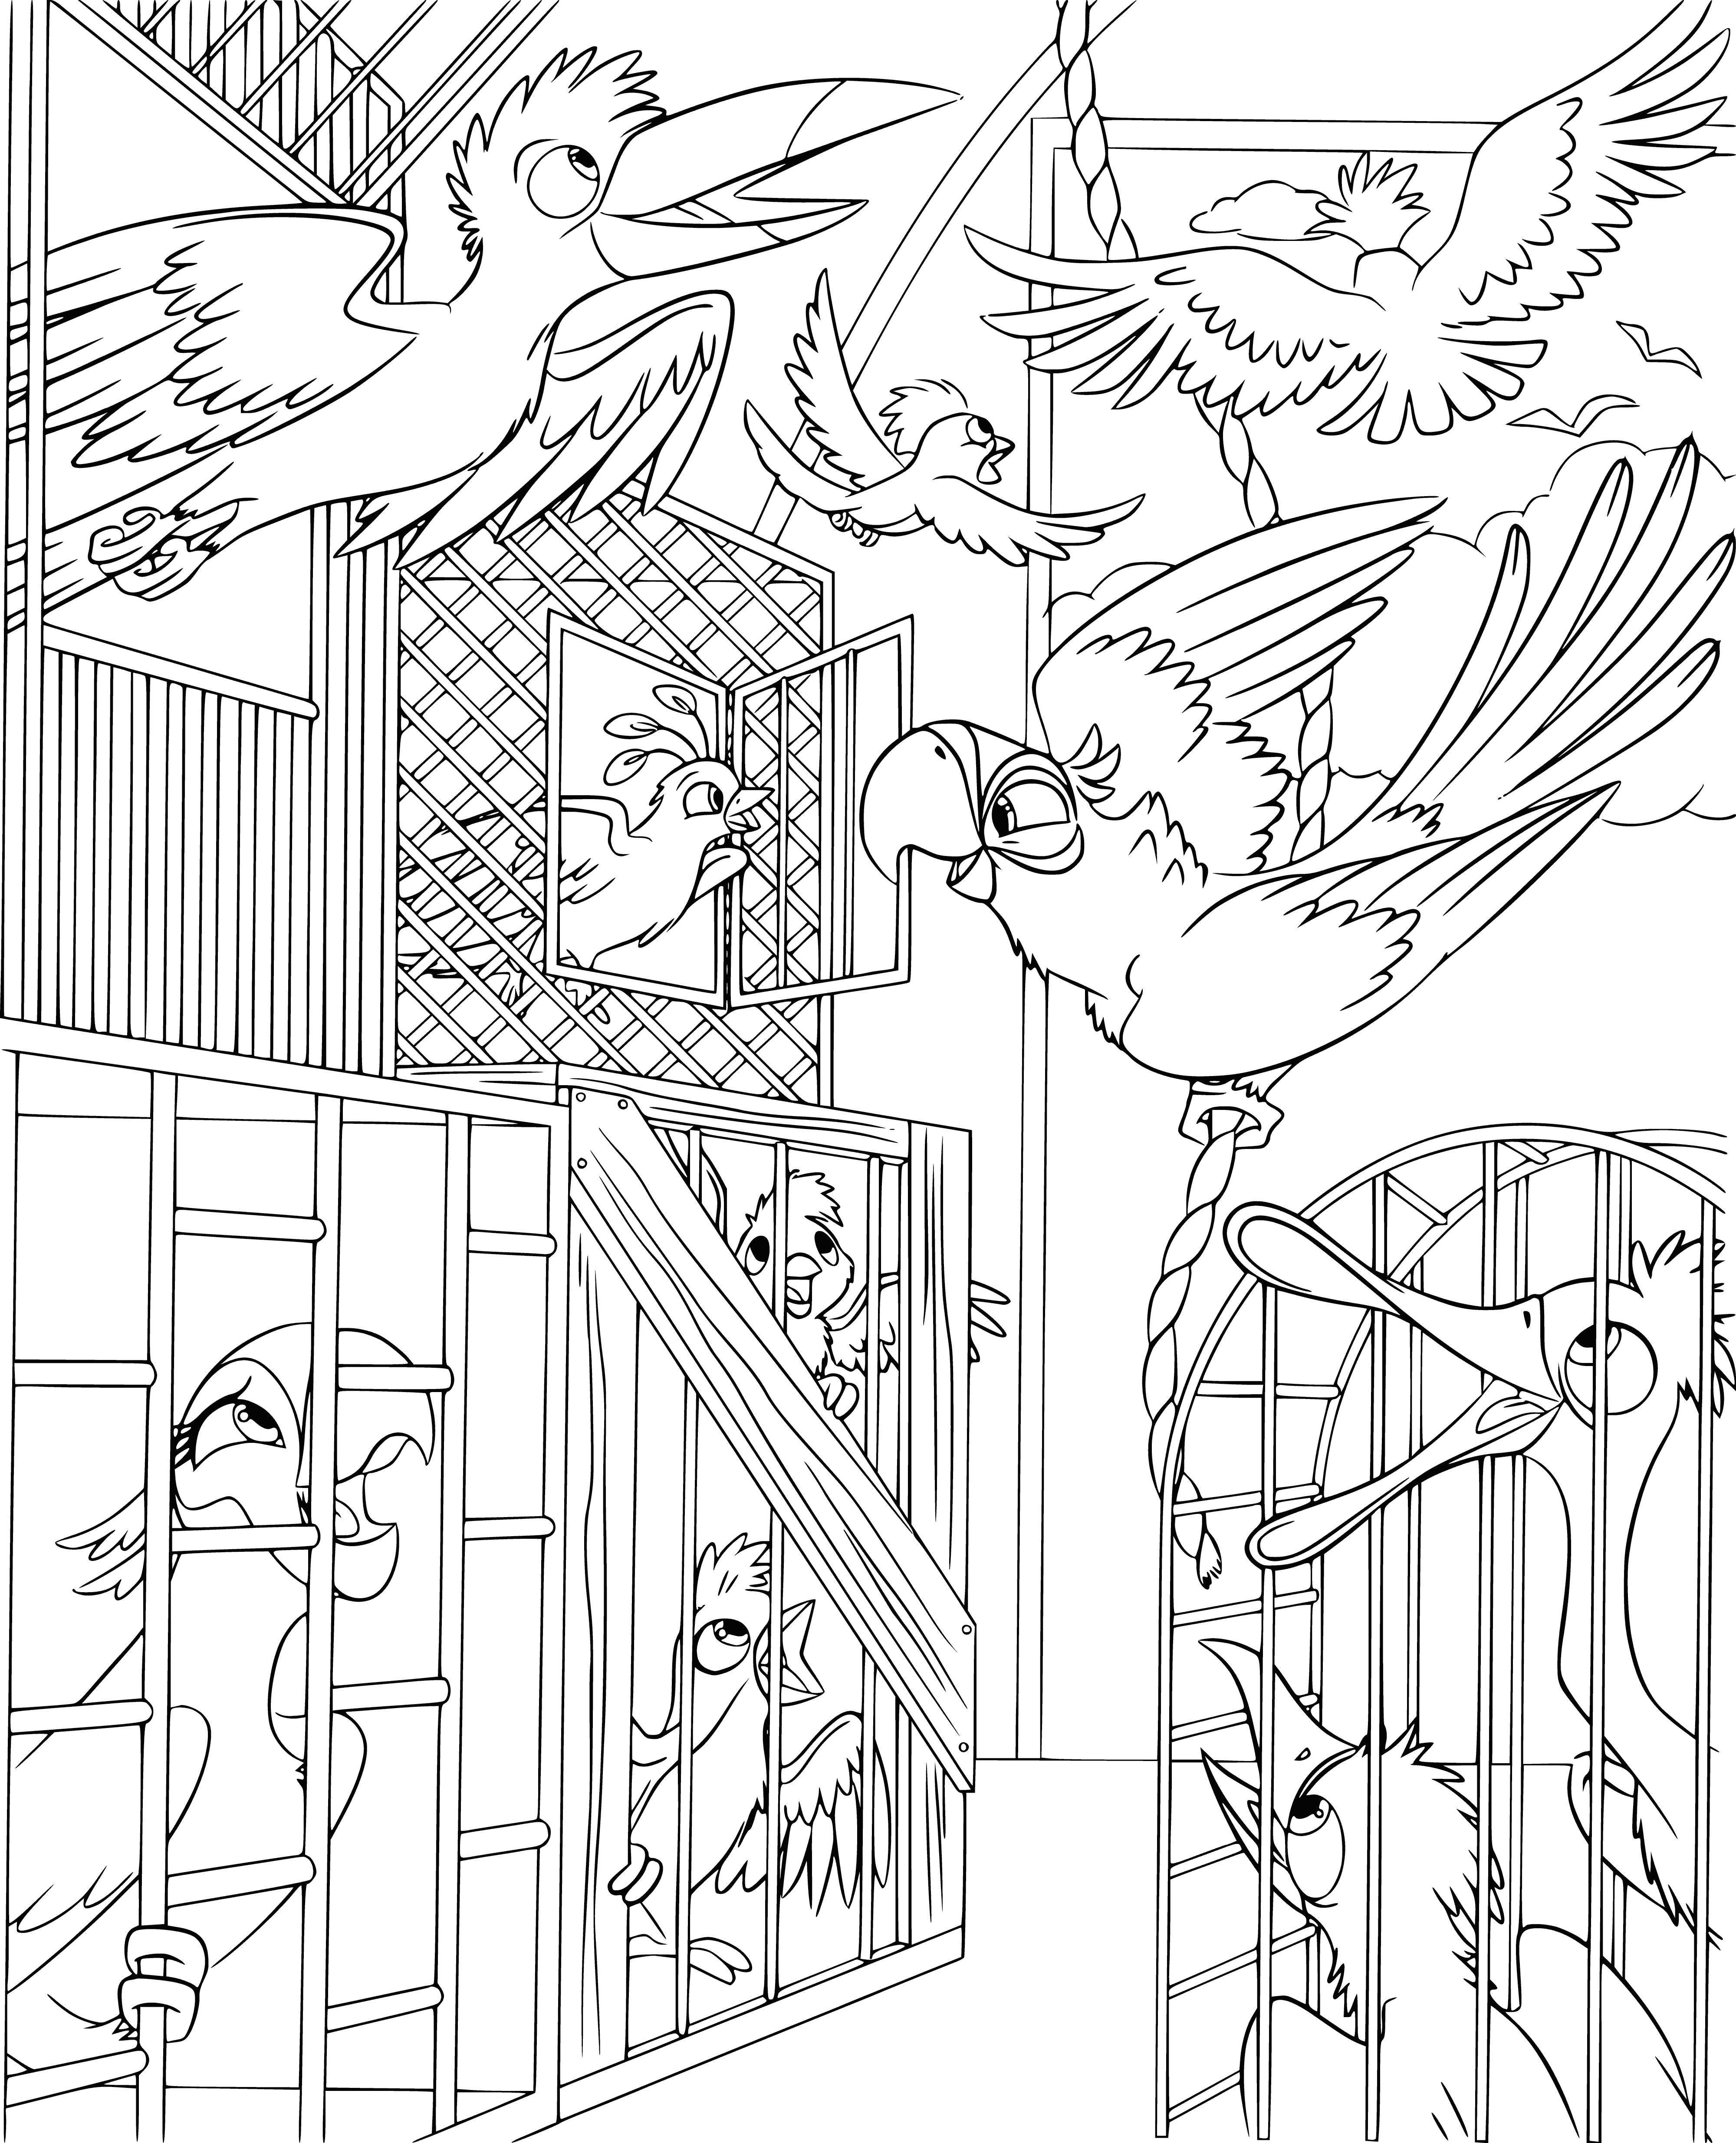 At large! coloring page